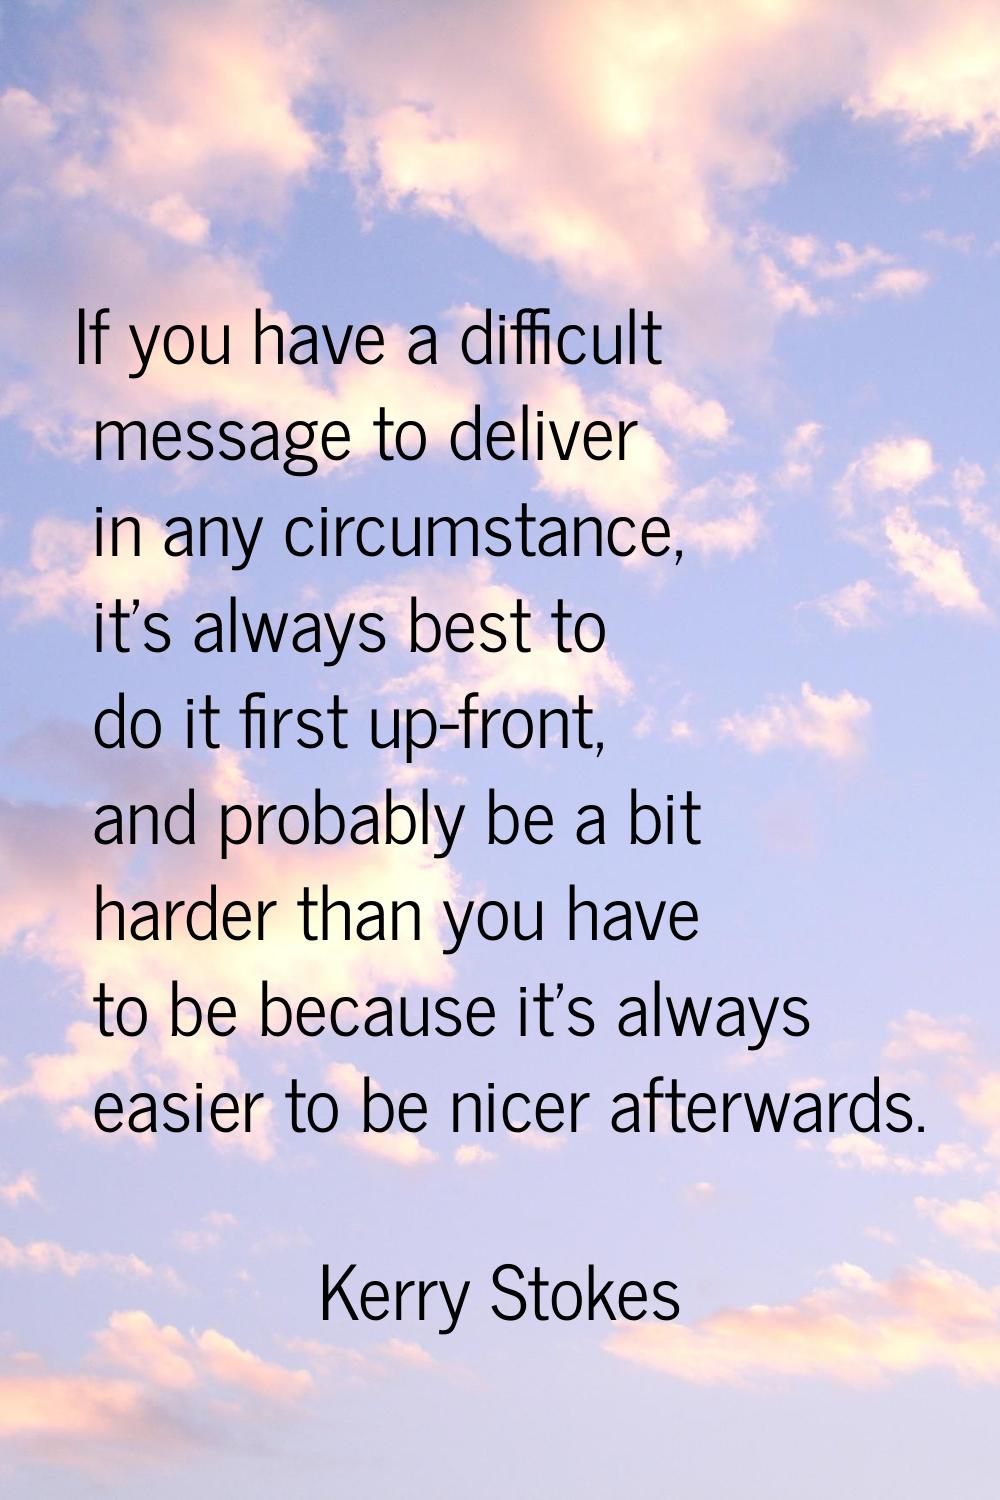 If you have a difficult message to deliver in any circumstance, it's always best to do it first up-